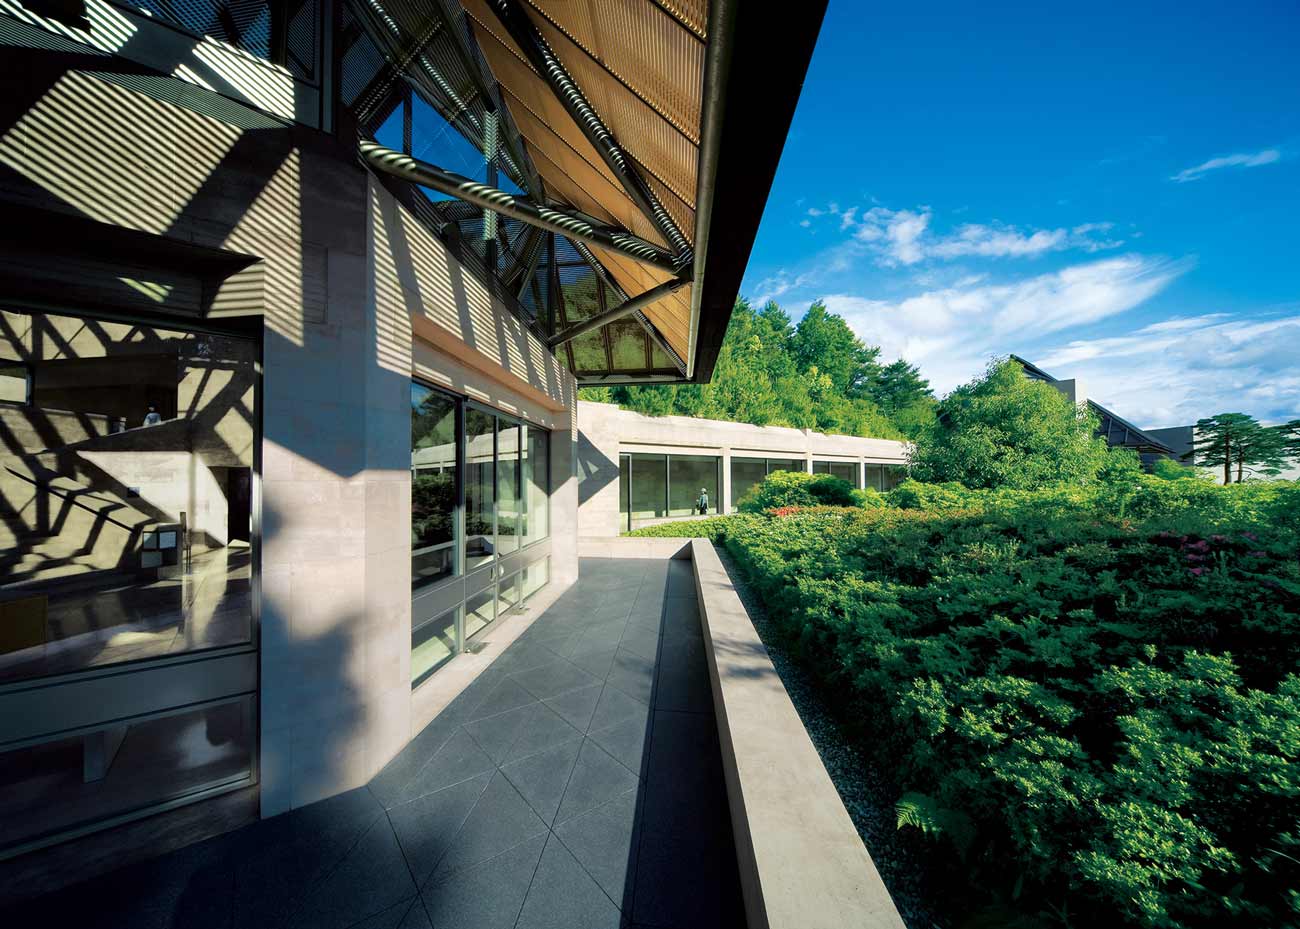 Miho Museum: All You Need to Know About this I.M. Pei Masterpiece